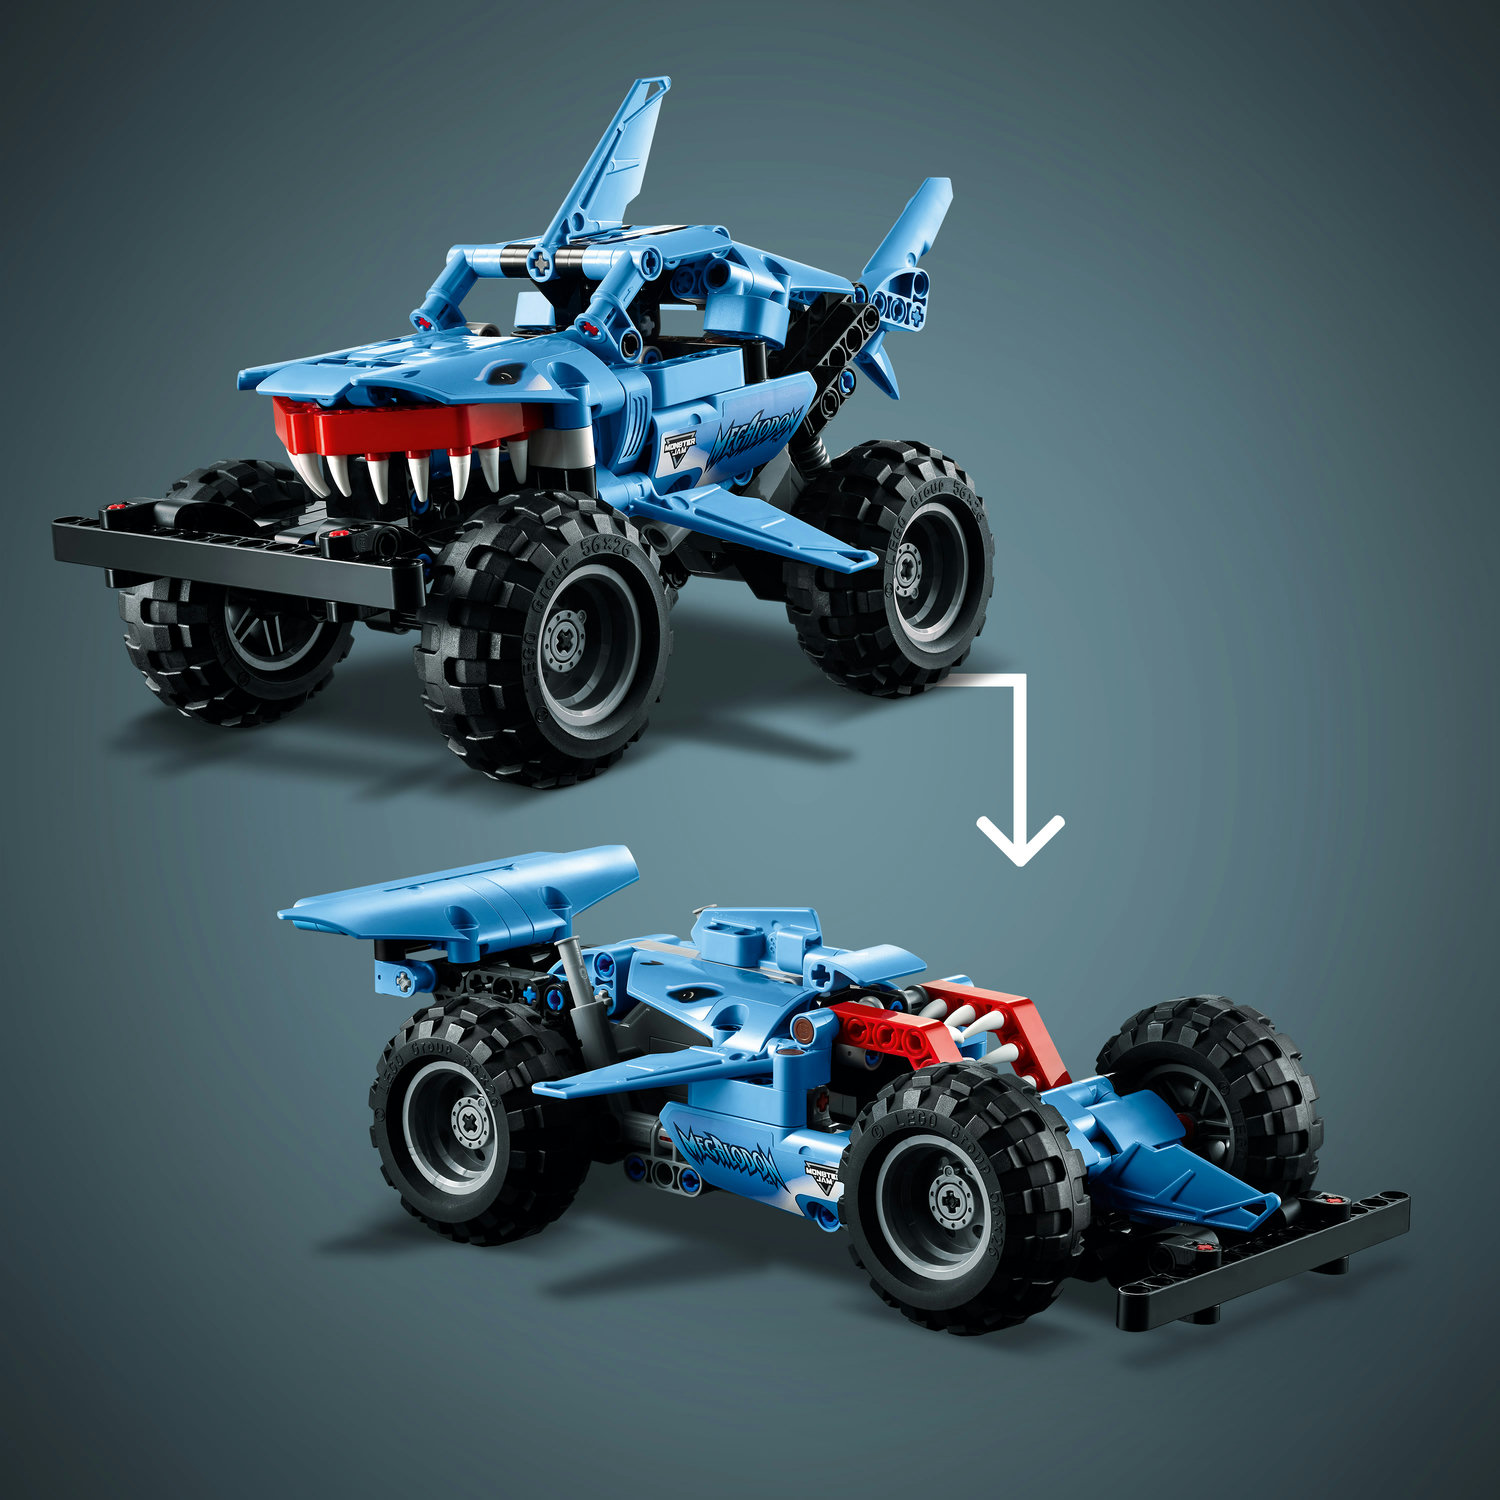 LEGO Technic Monster Jam Megalodon 42134 2 in 1 Pull Back Shark Truck to Lusca Low Racer Car Toy, 2022 Series, Set for Kids, Boys and Girls 7 Plus Years Old - image 8 of 10